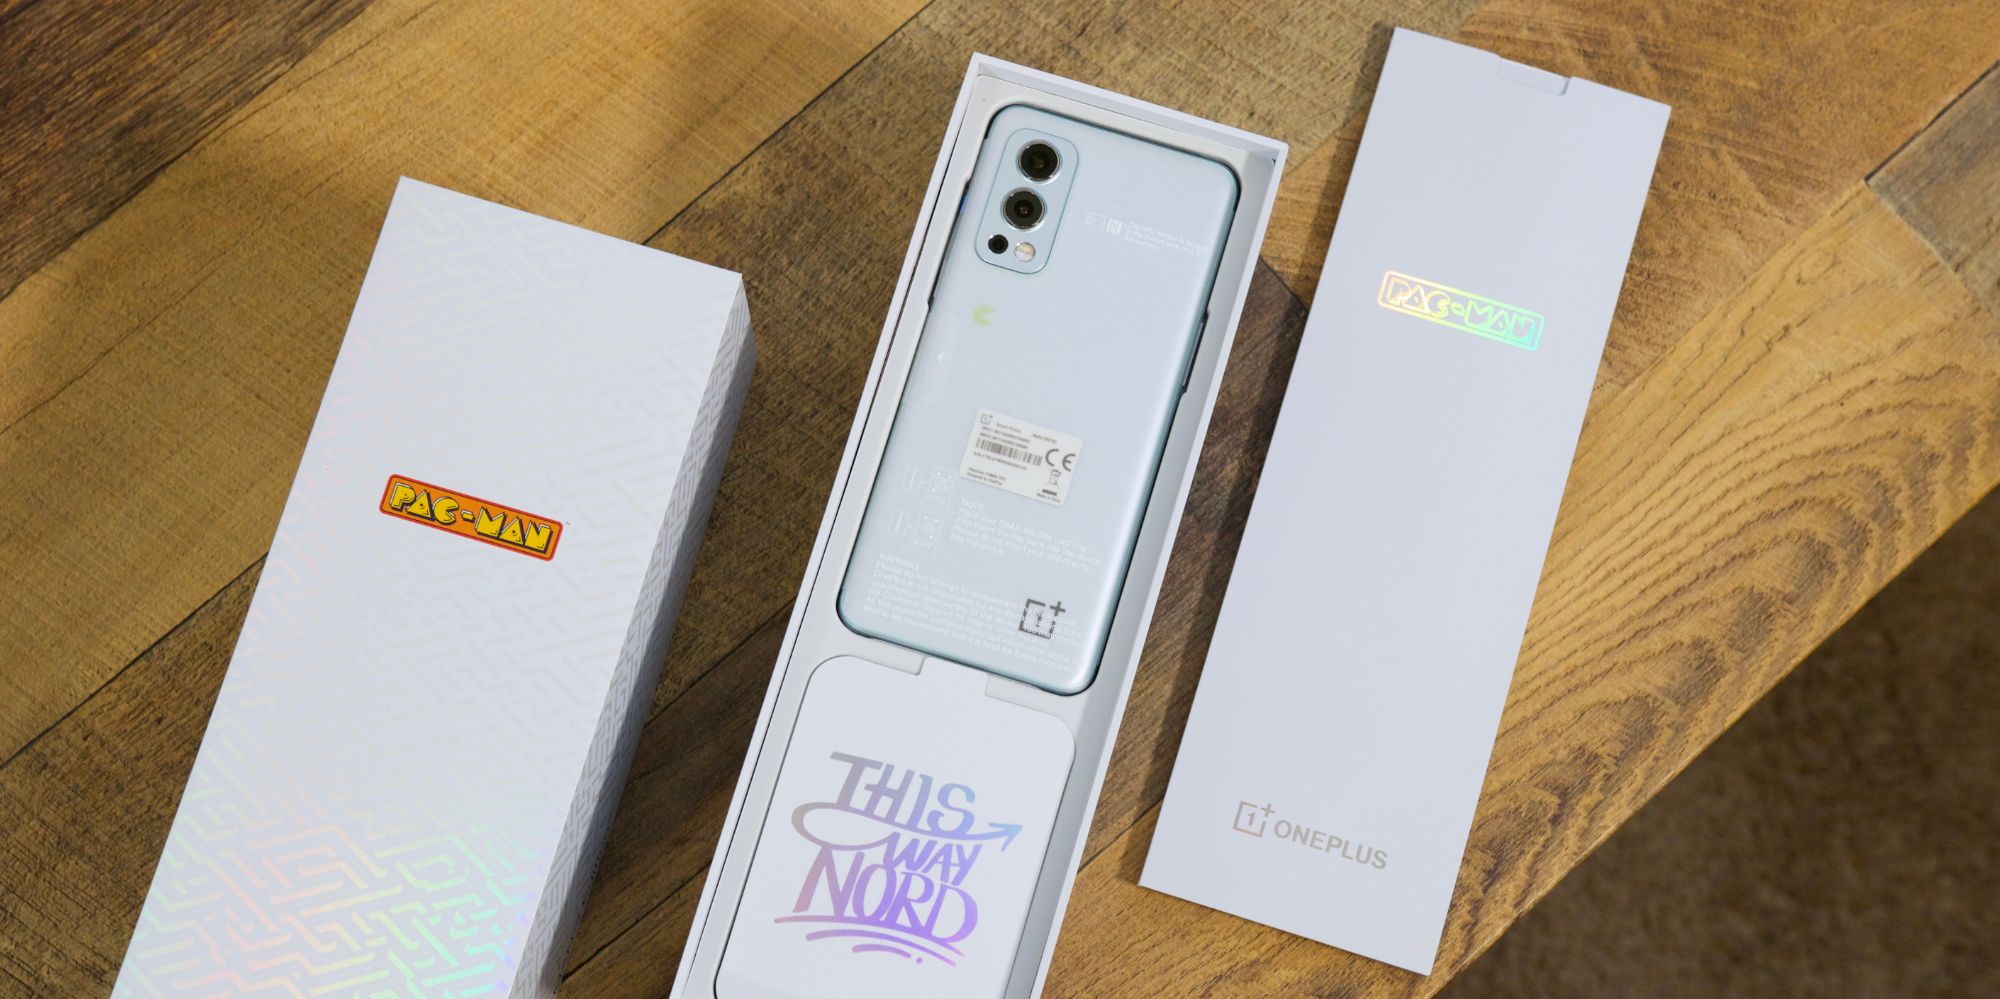 OnePlus Nord 2 x Pac-Man review - A good choice if you want